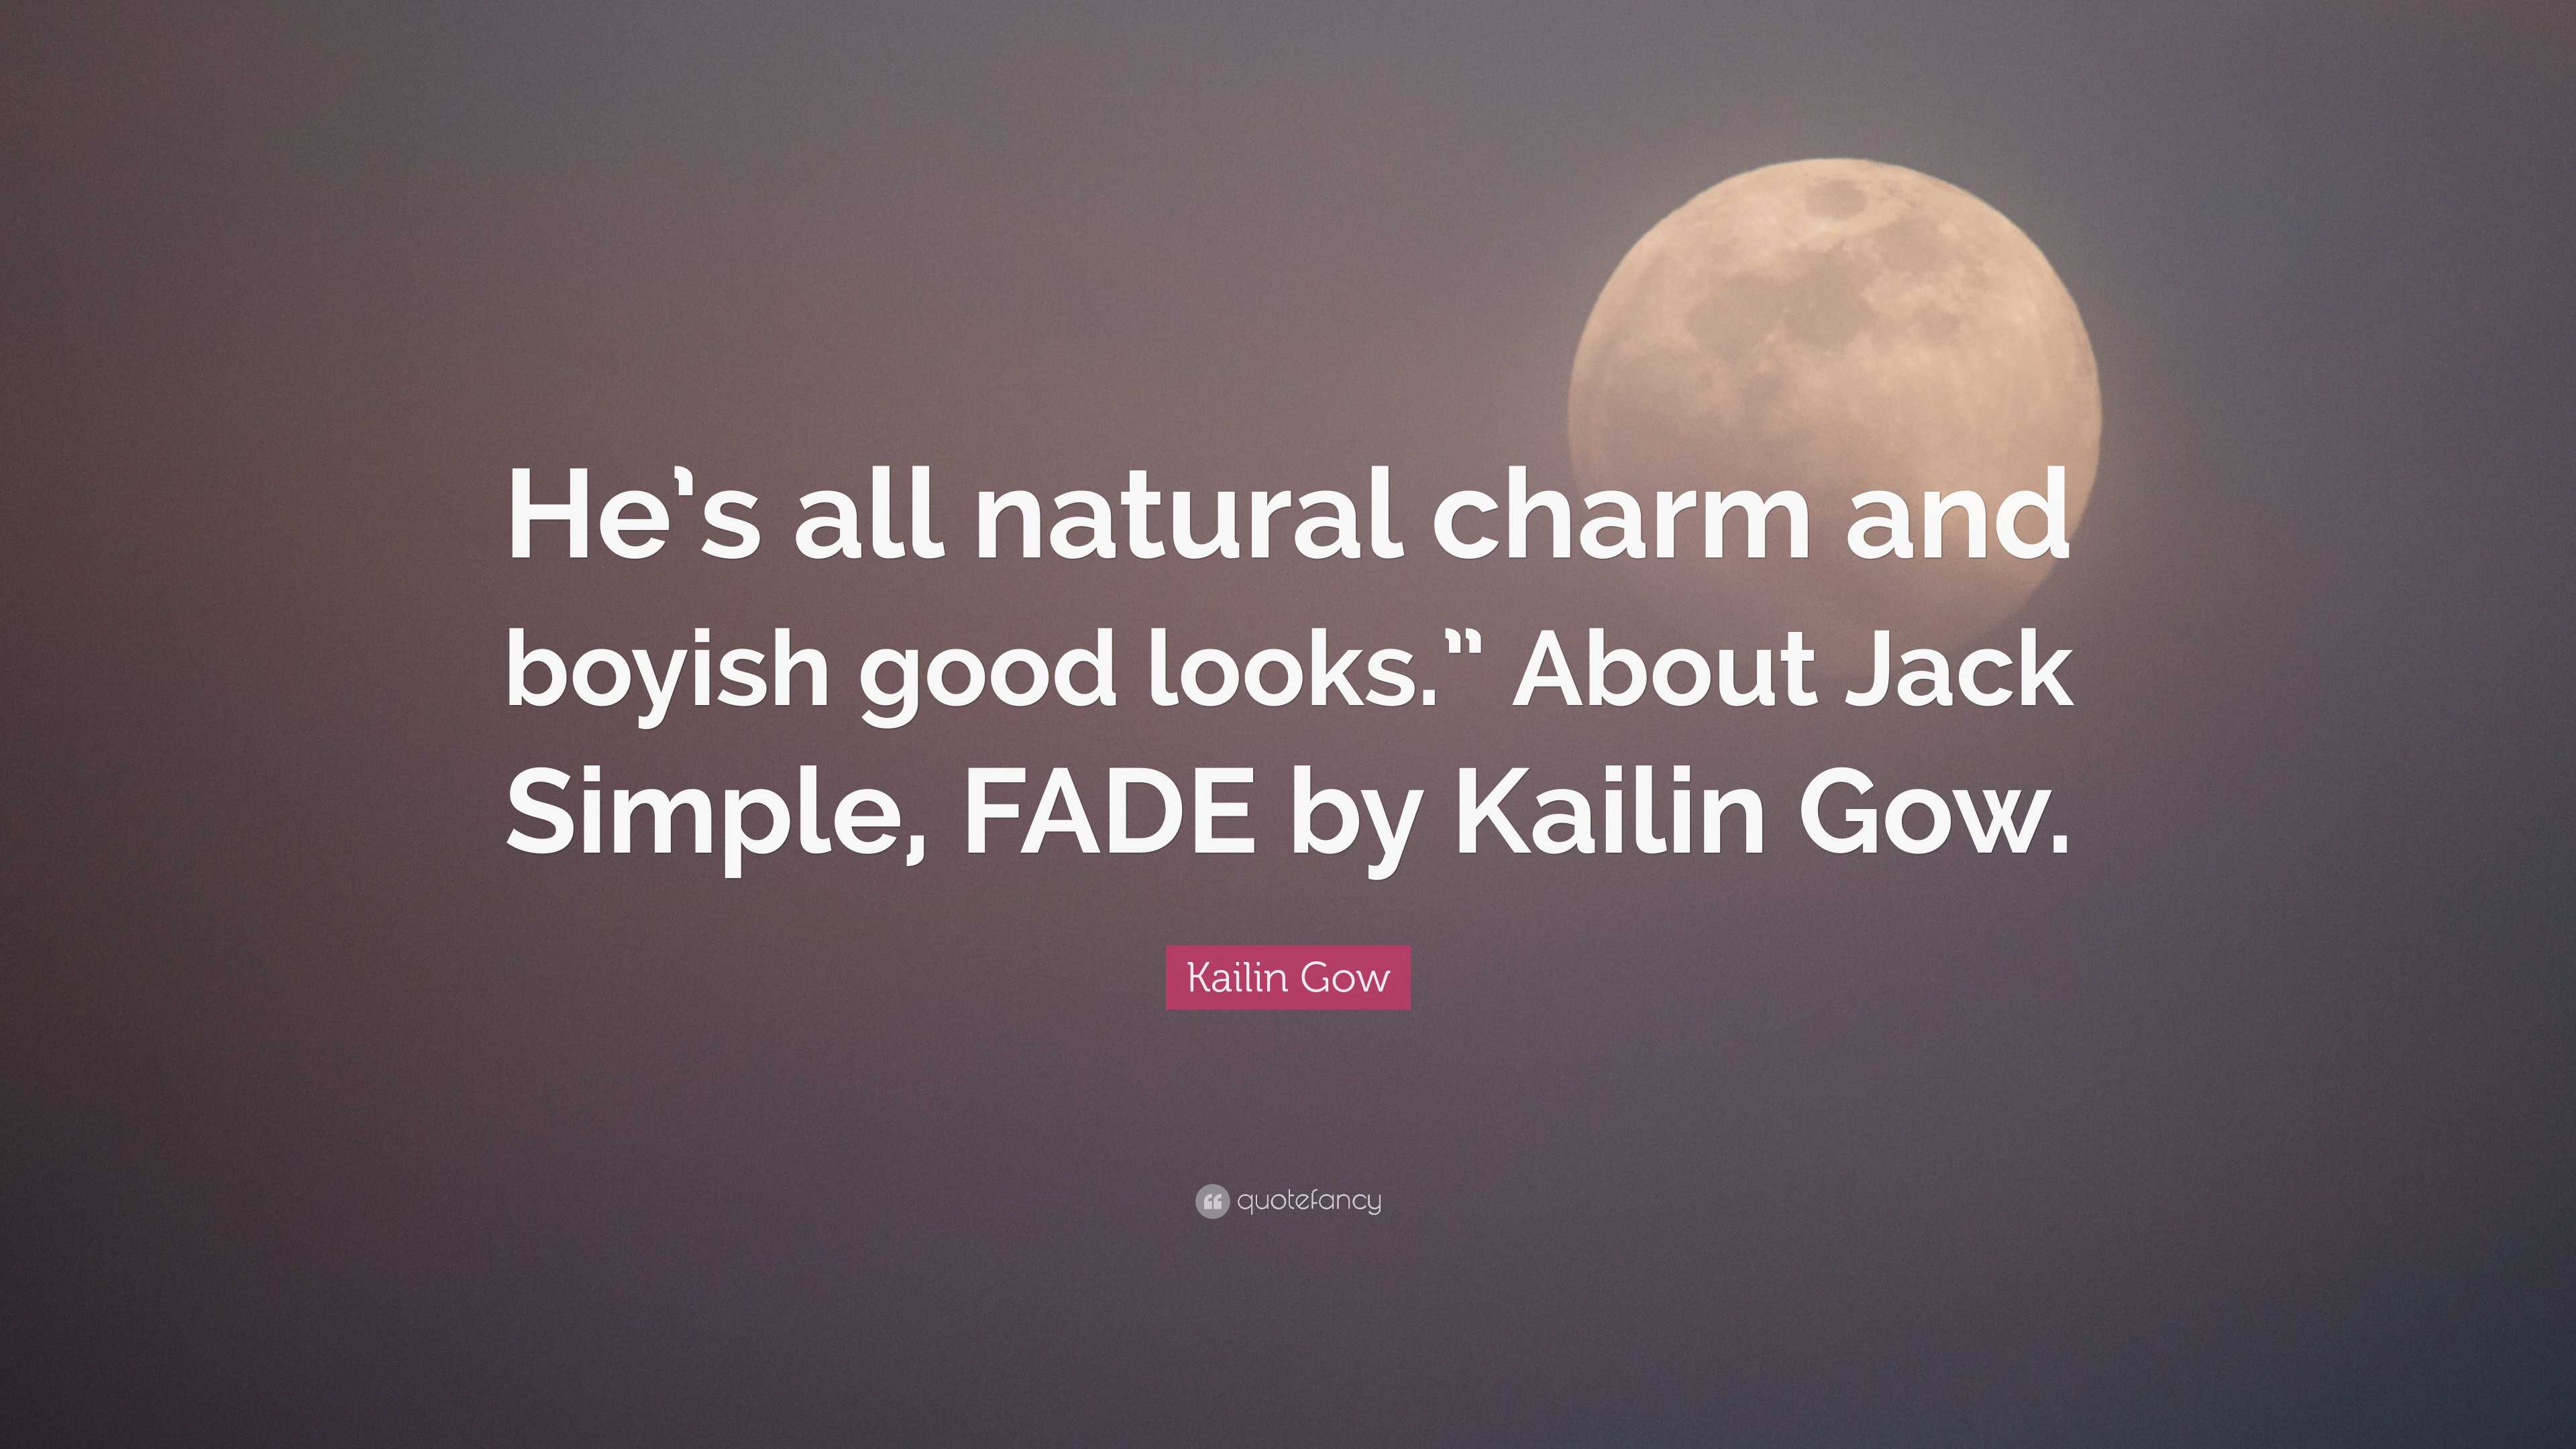 Image result for good looks fade quote